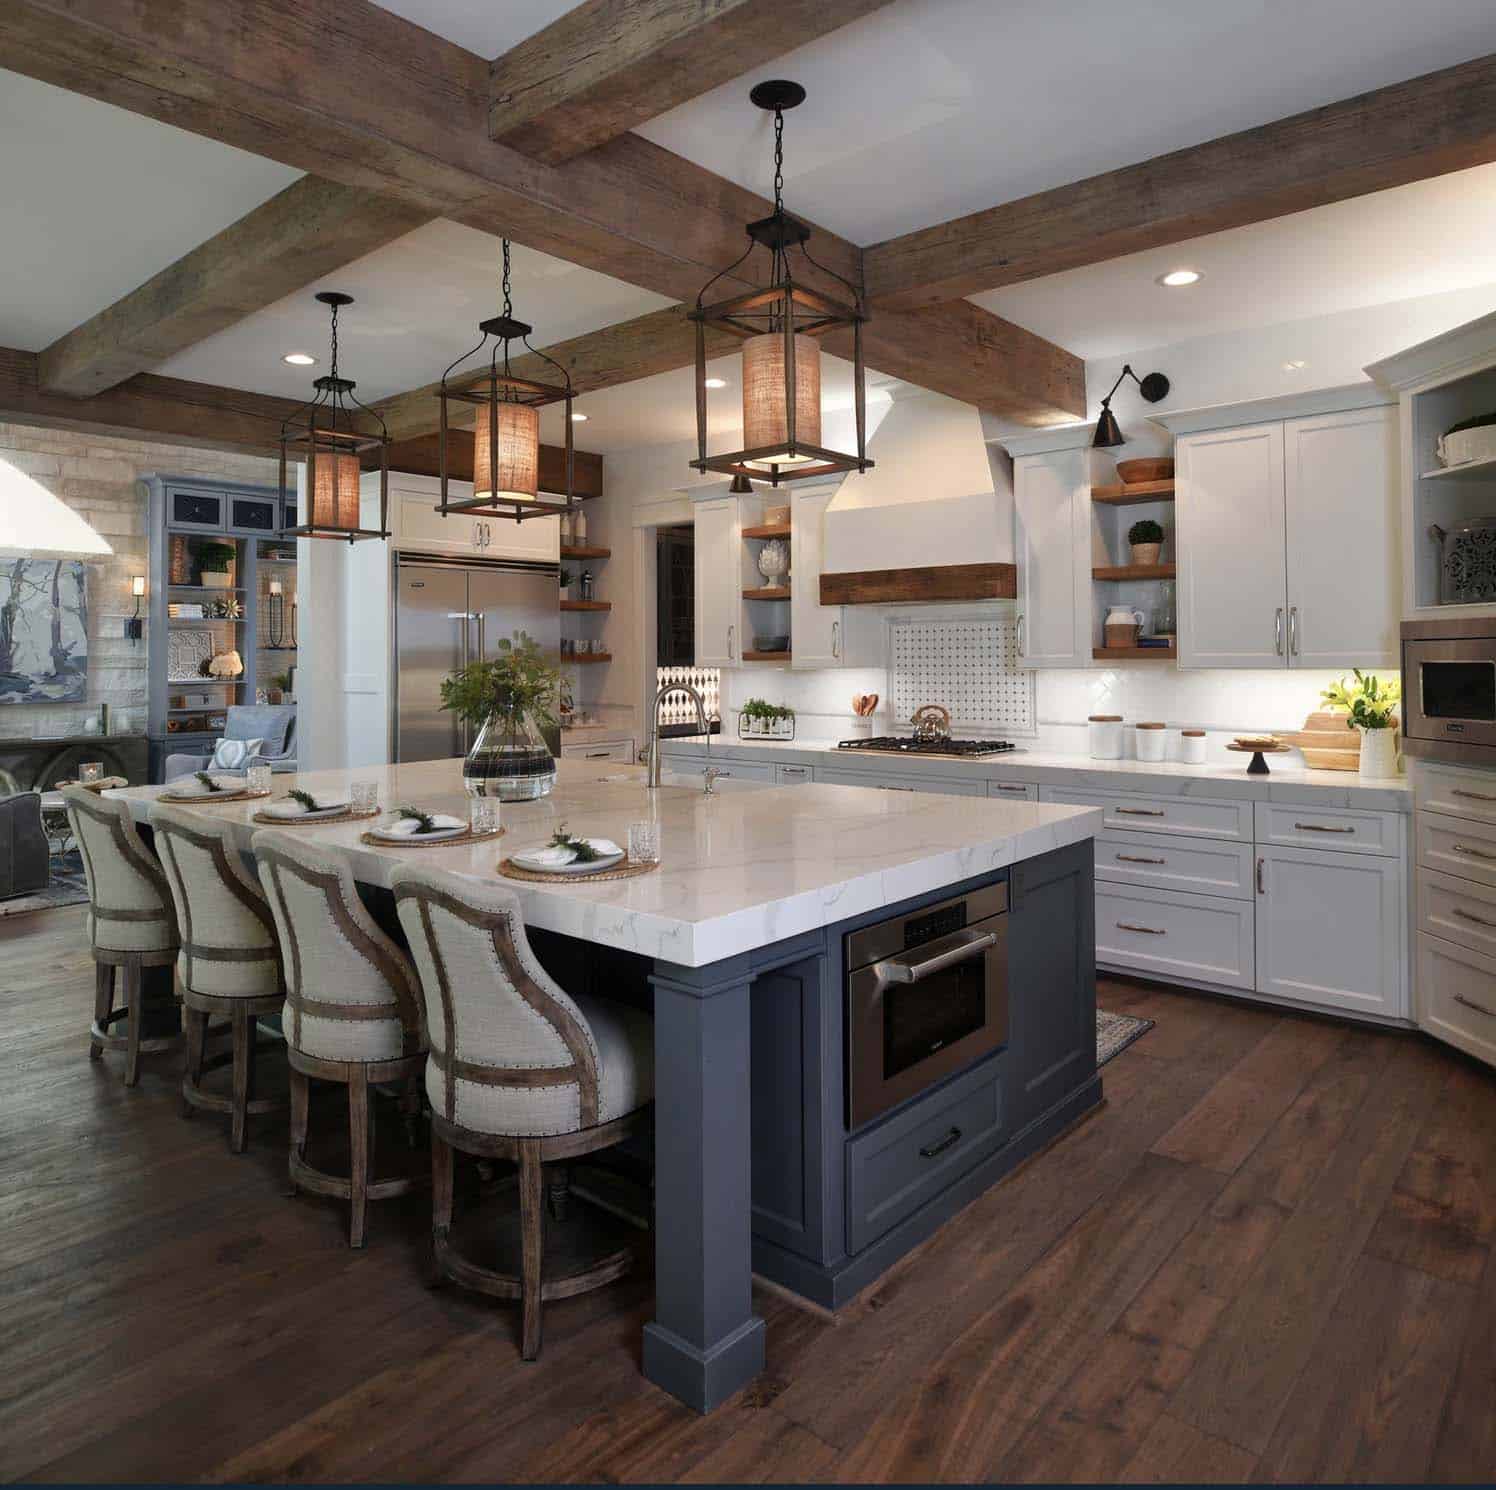 rustic kitchen with wood ceiling beams and a blue painted island with white perimeter cabinets